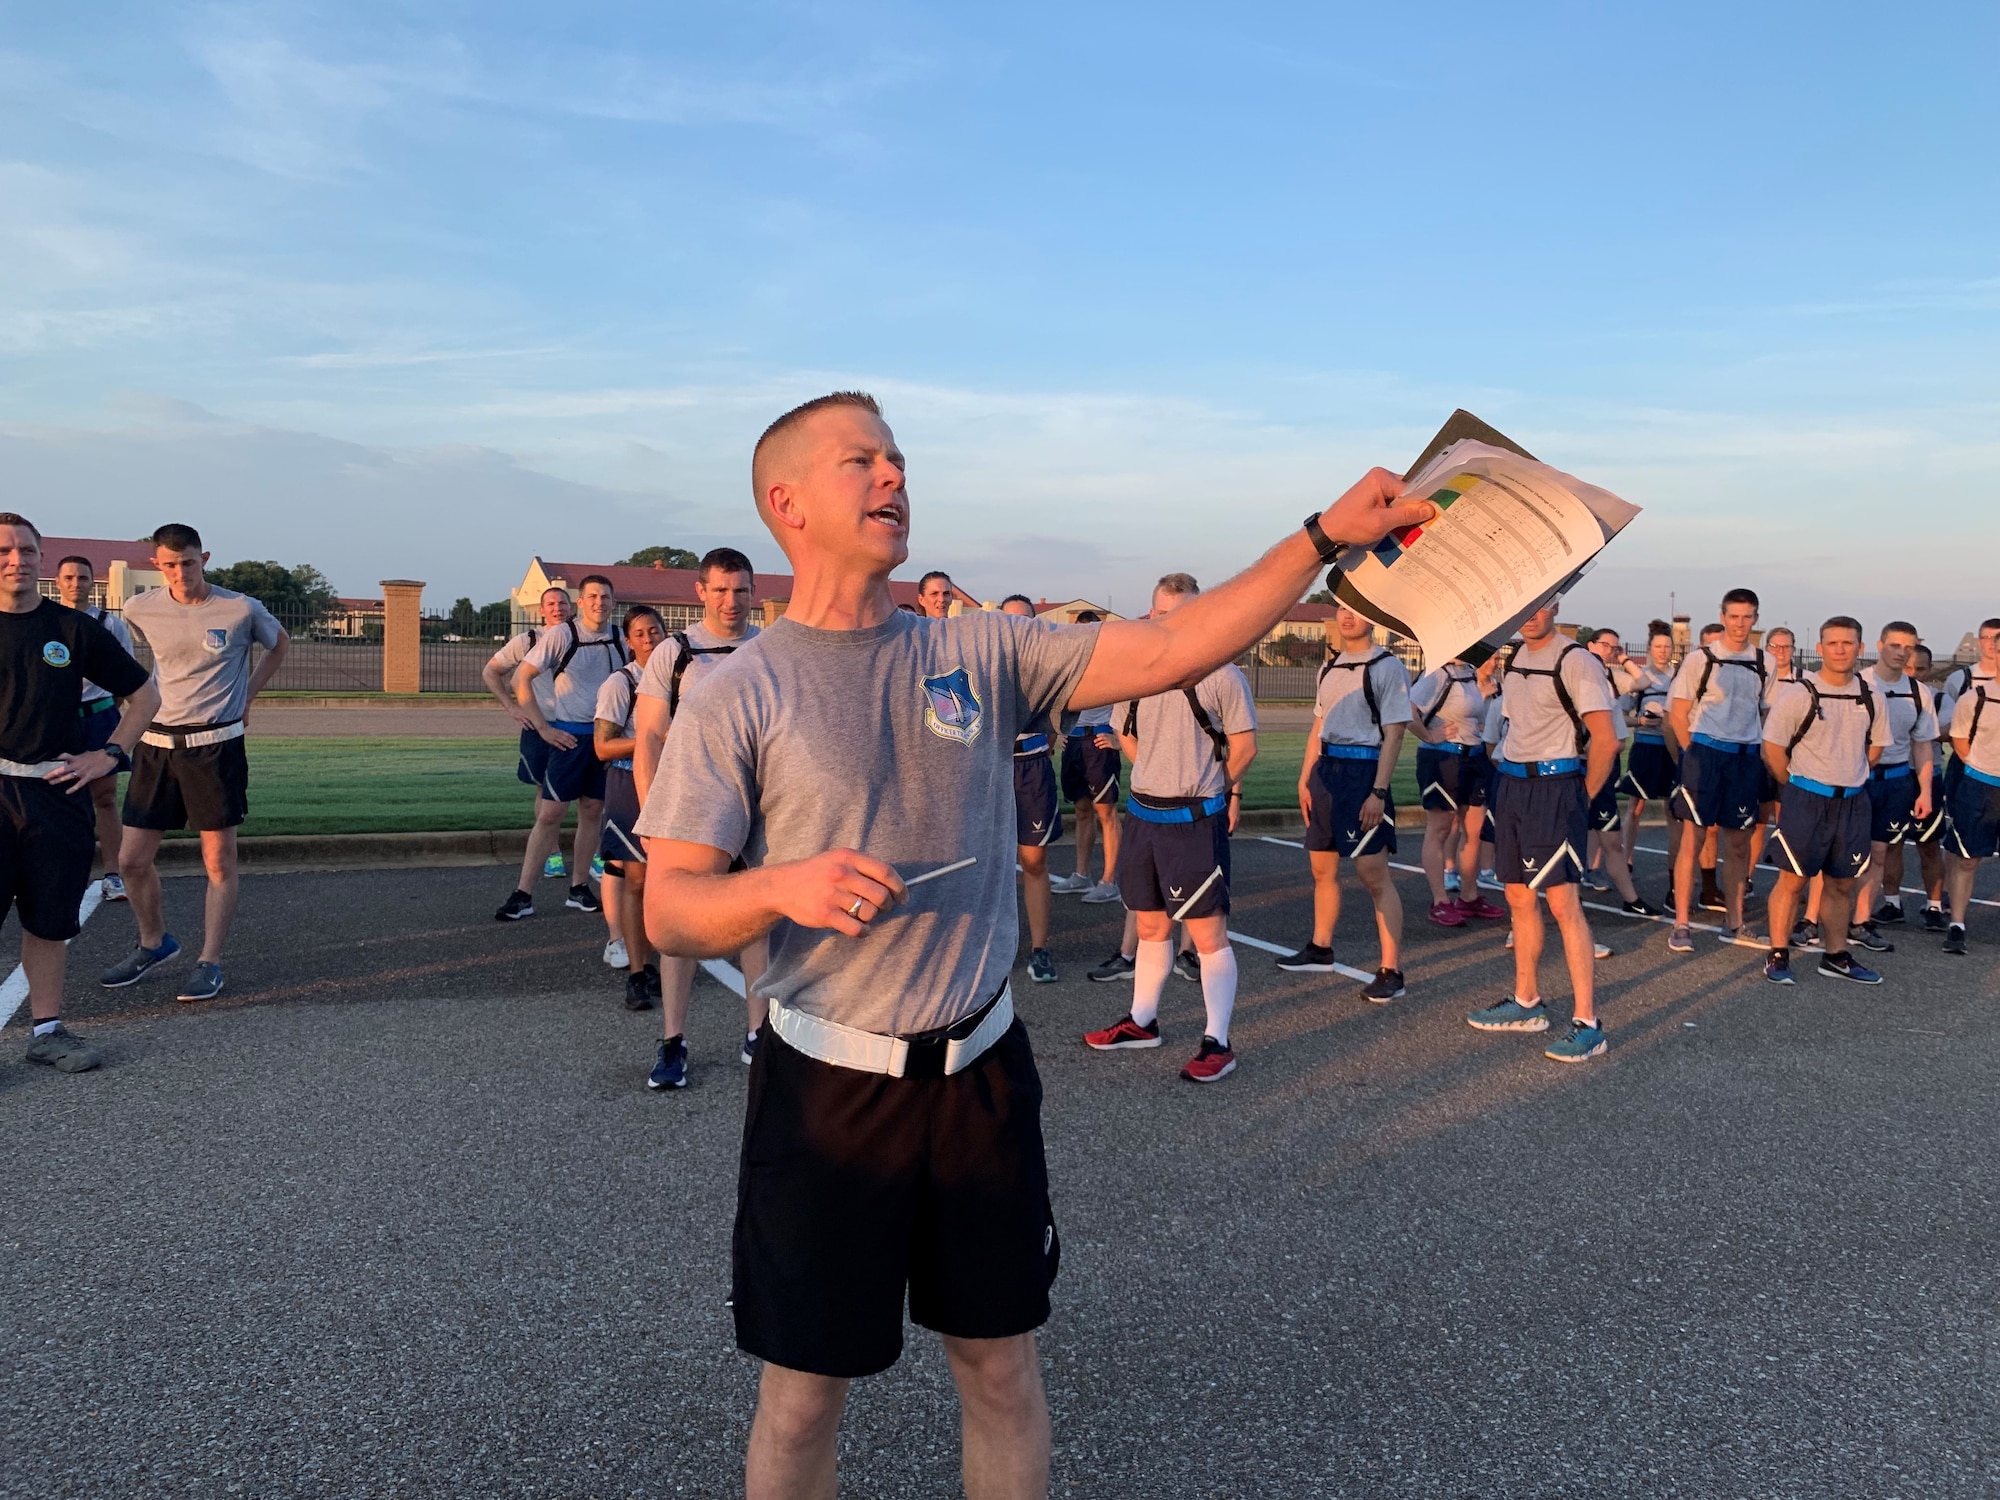 Capt. Dan Hochhalter, Officer Training School instructor, shouts to trainees during a physical training session at Maxwell Air Force Base, Alabama.